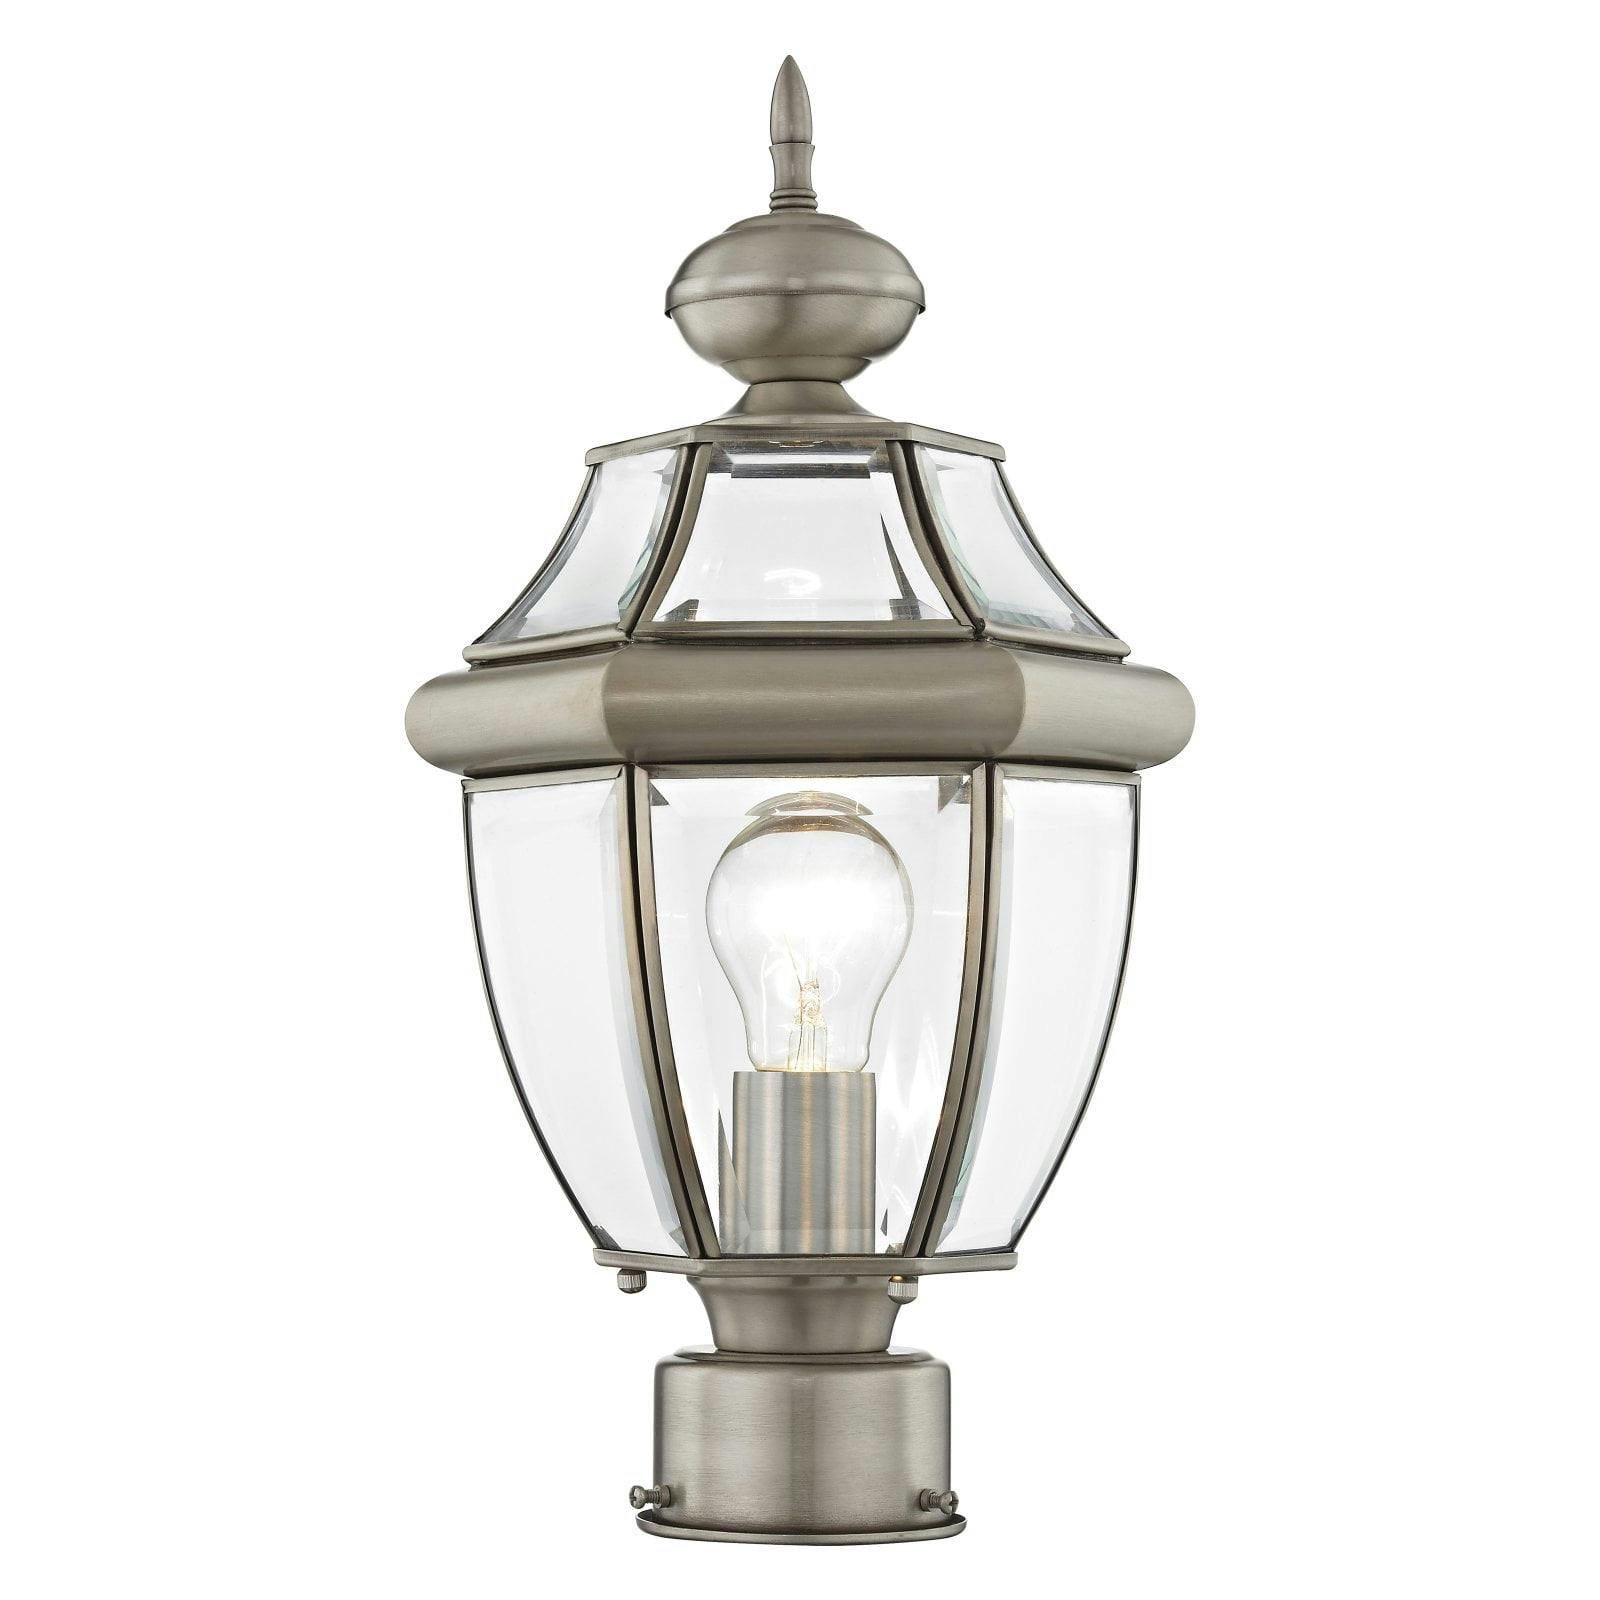 Monterey Elegance Brushed Nickel Outdoor Post Light with Clear Beveled Glass